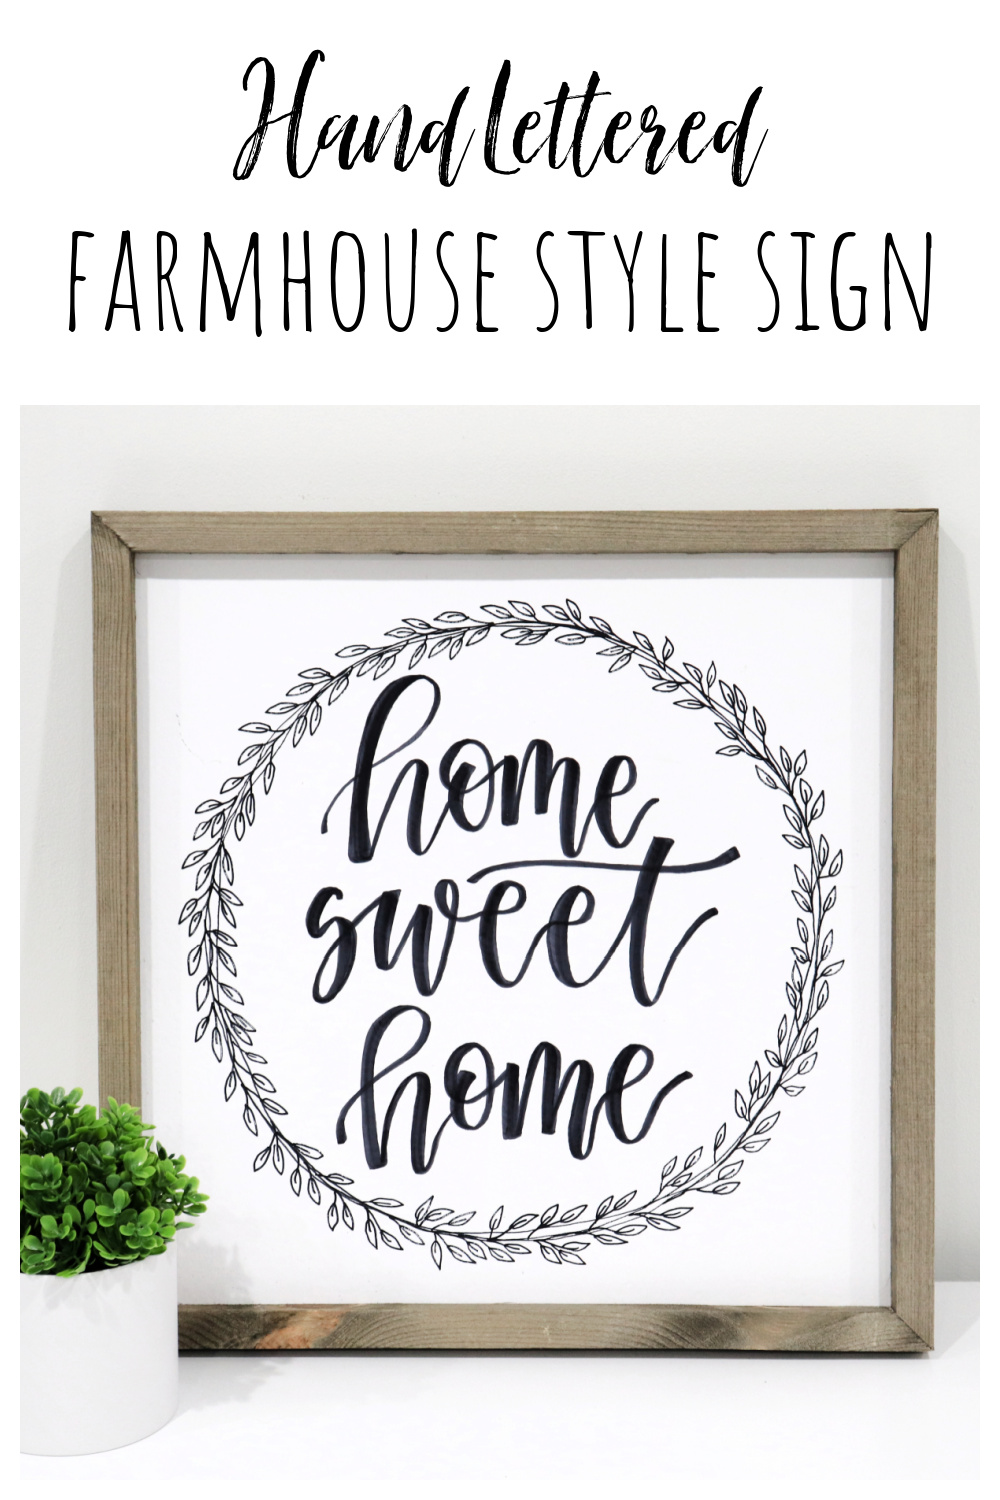 Hand Lettered Farmhouse Style Sign